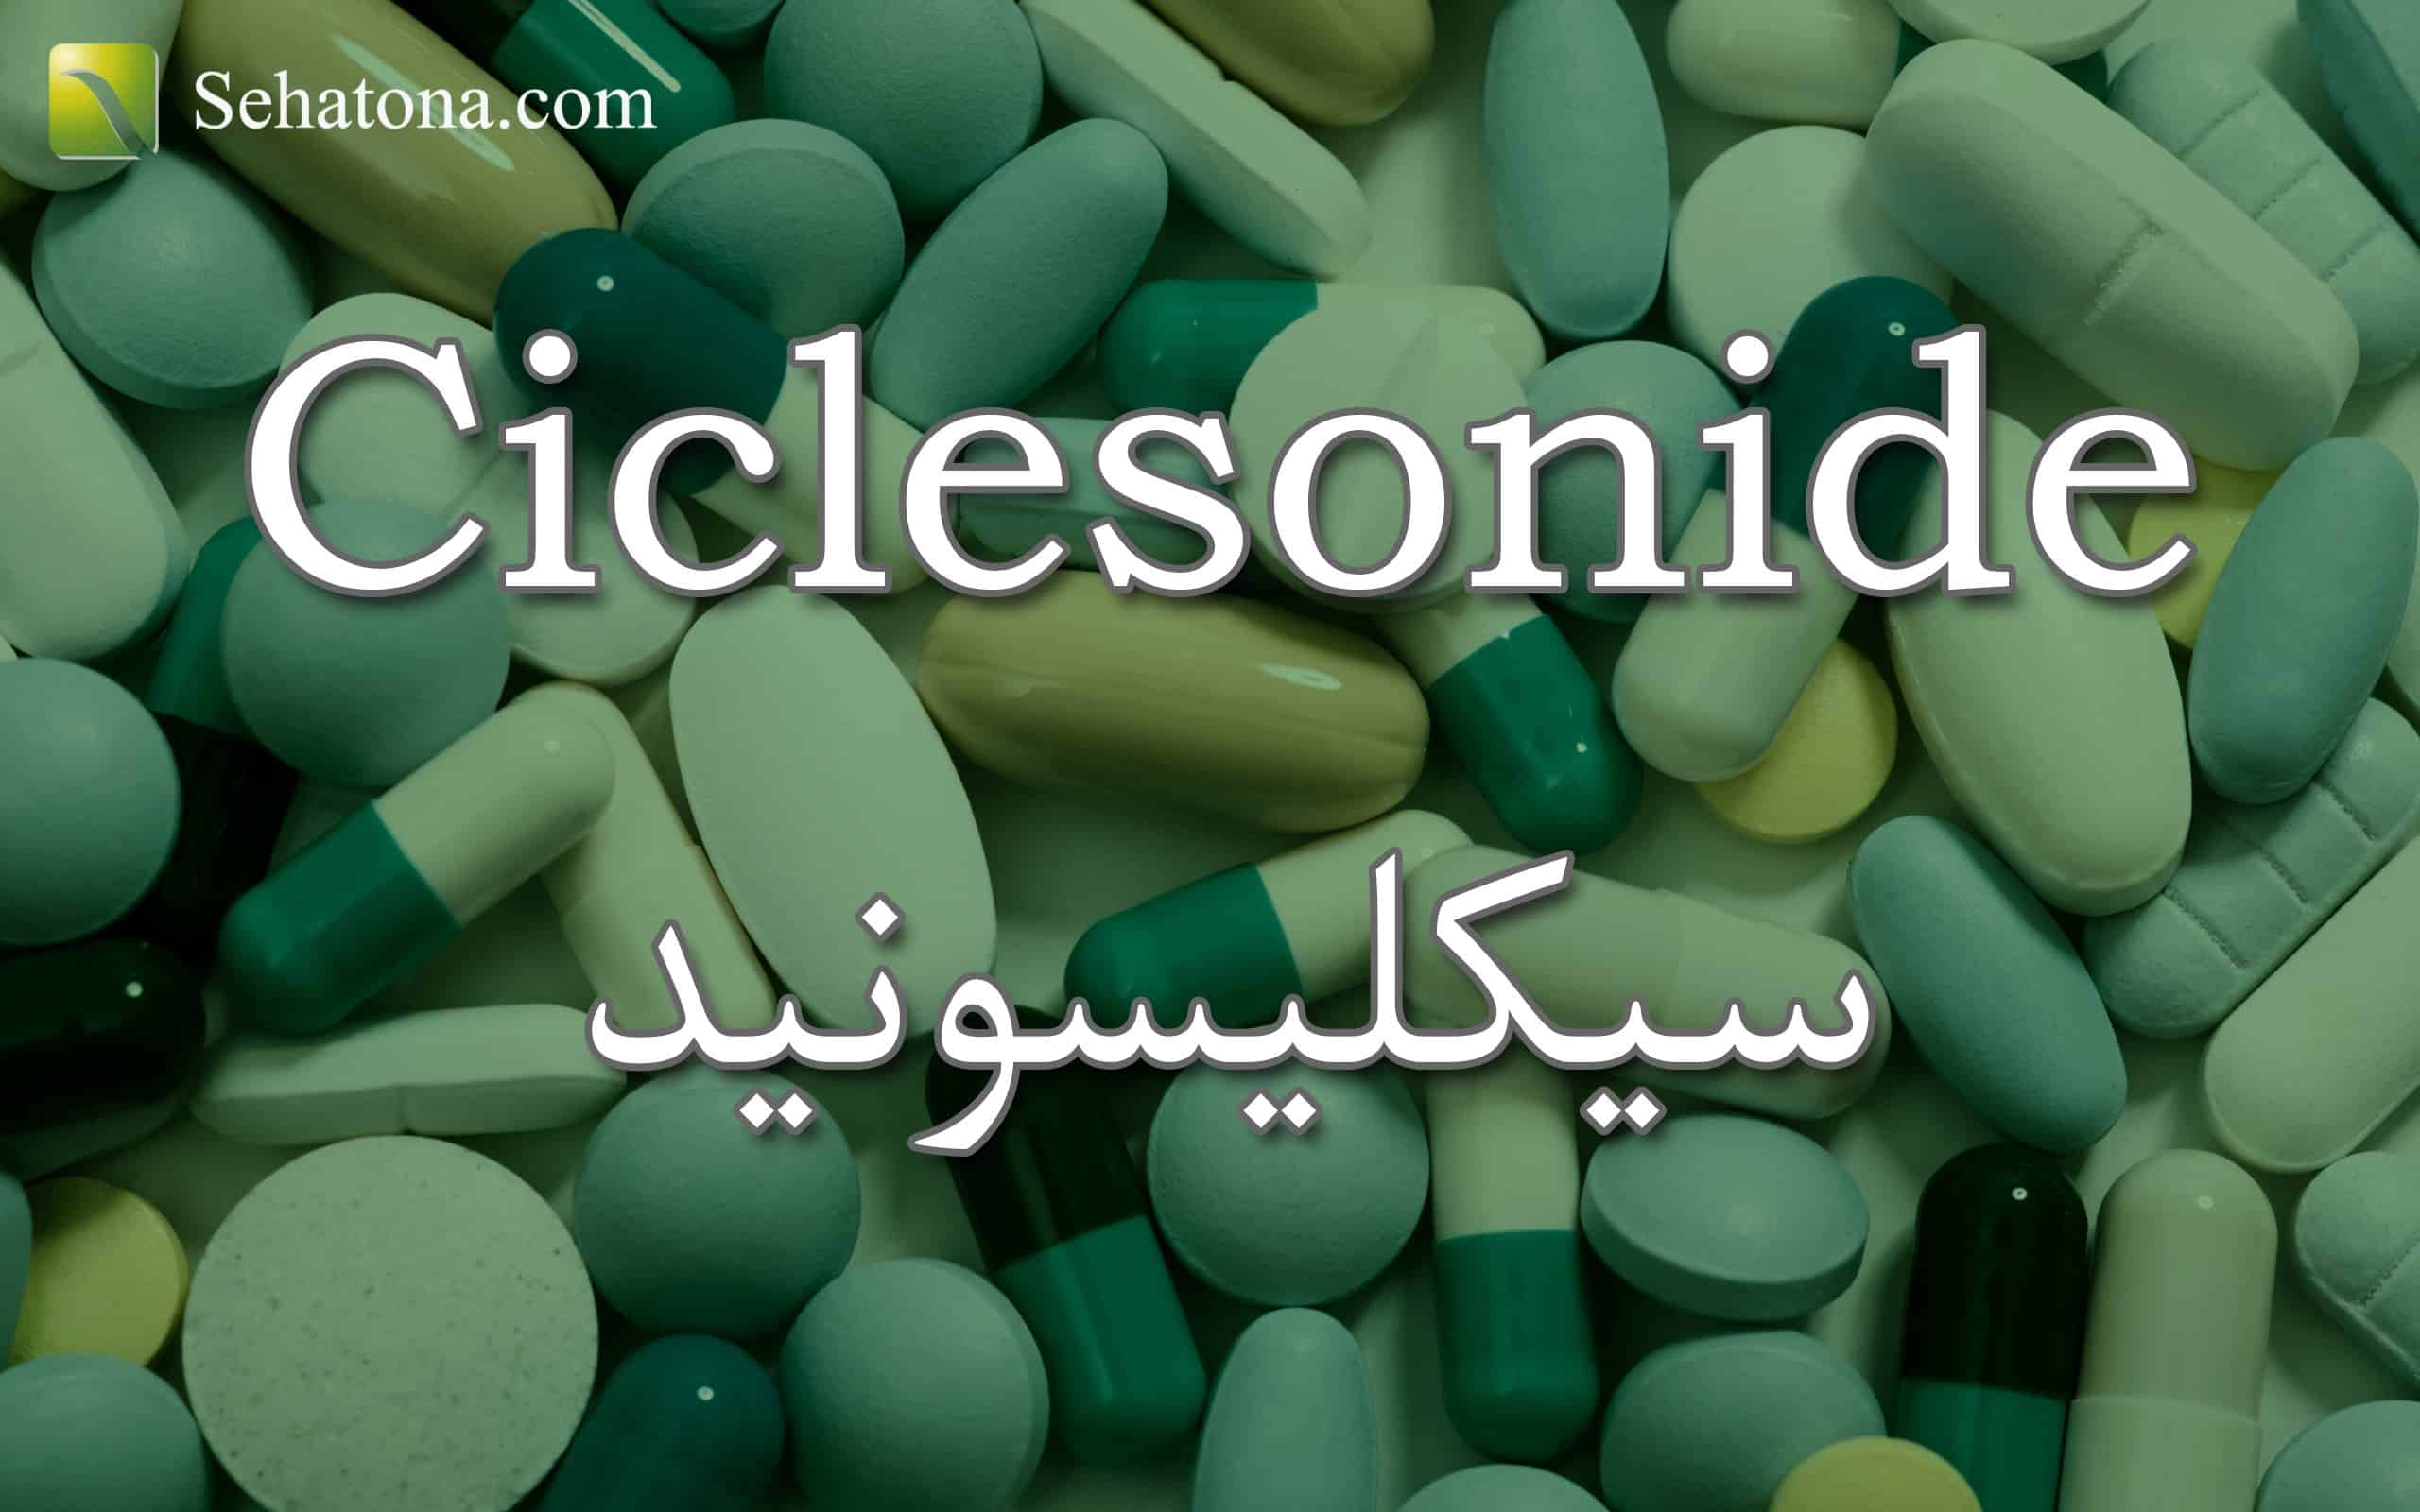 Ciclesonide